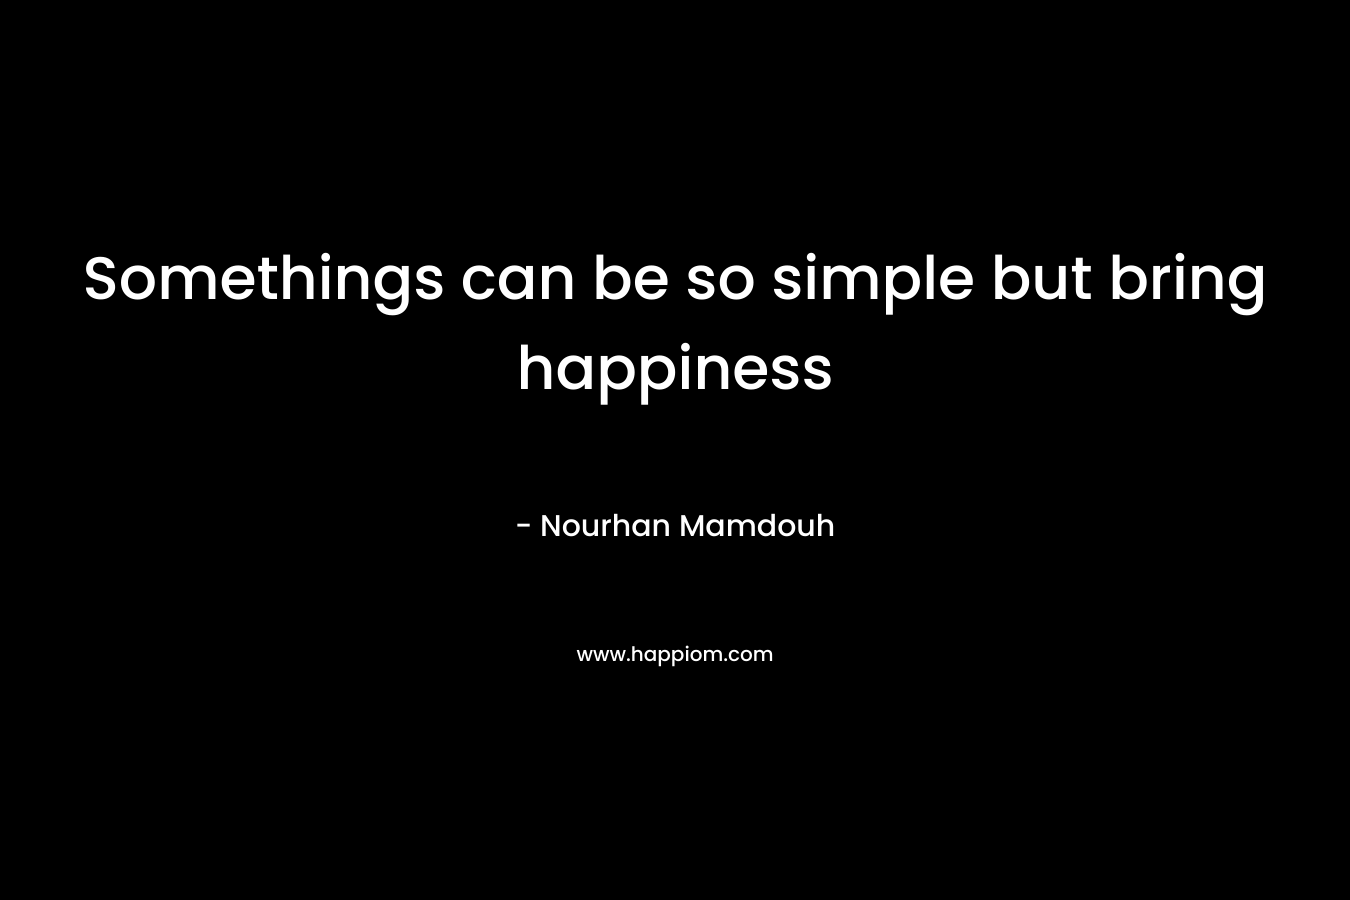 Somethings can be so simple but bring happiness